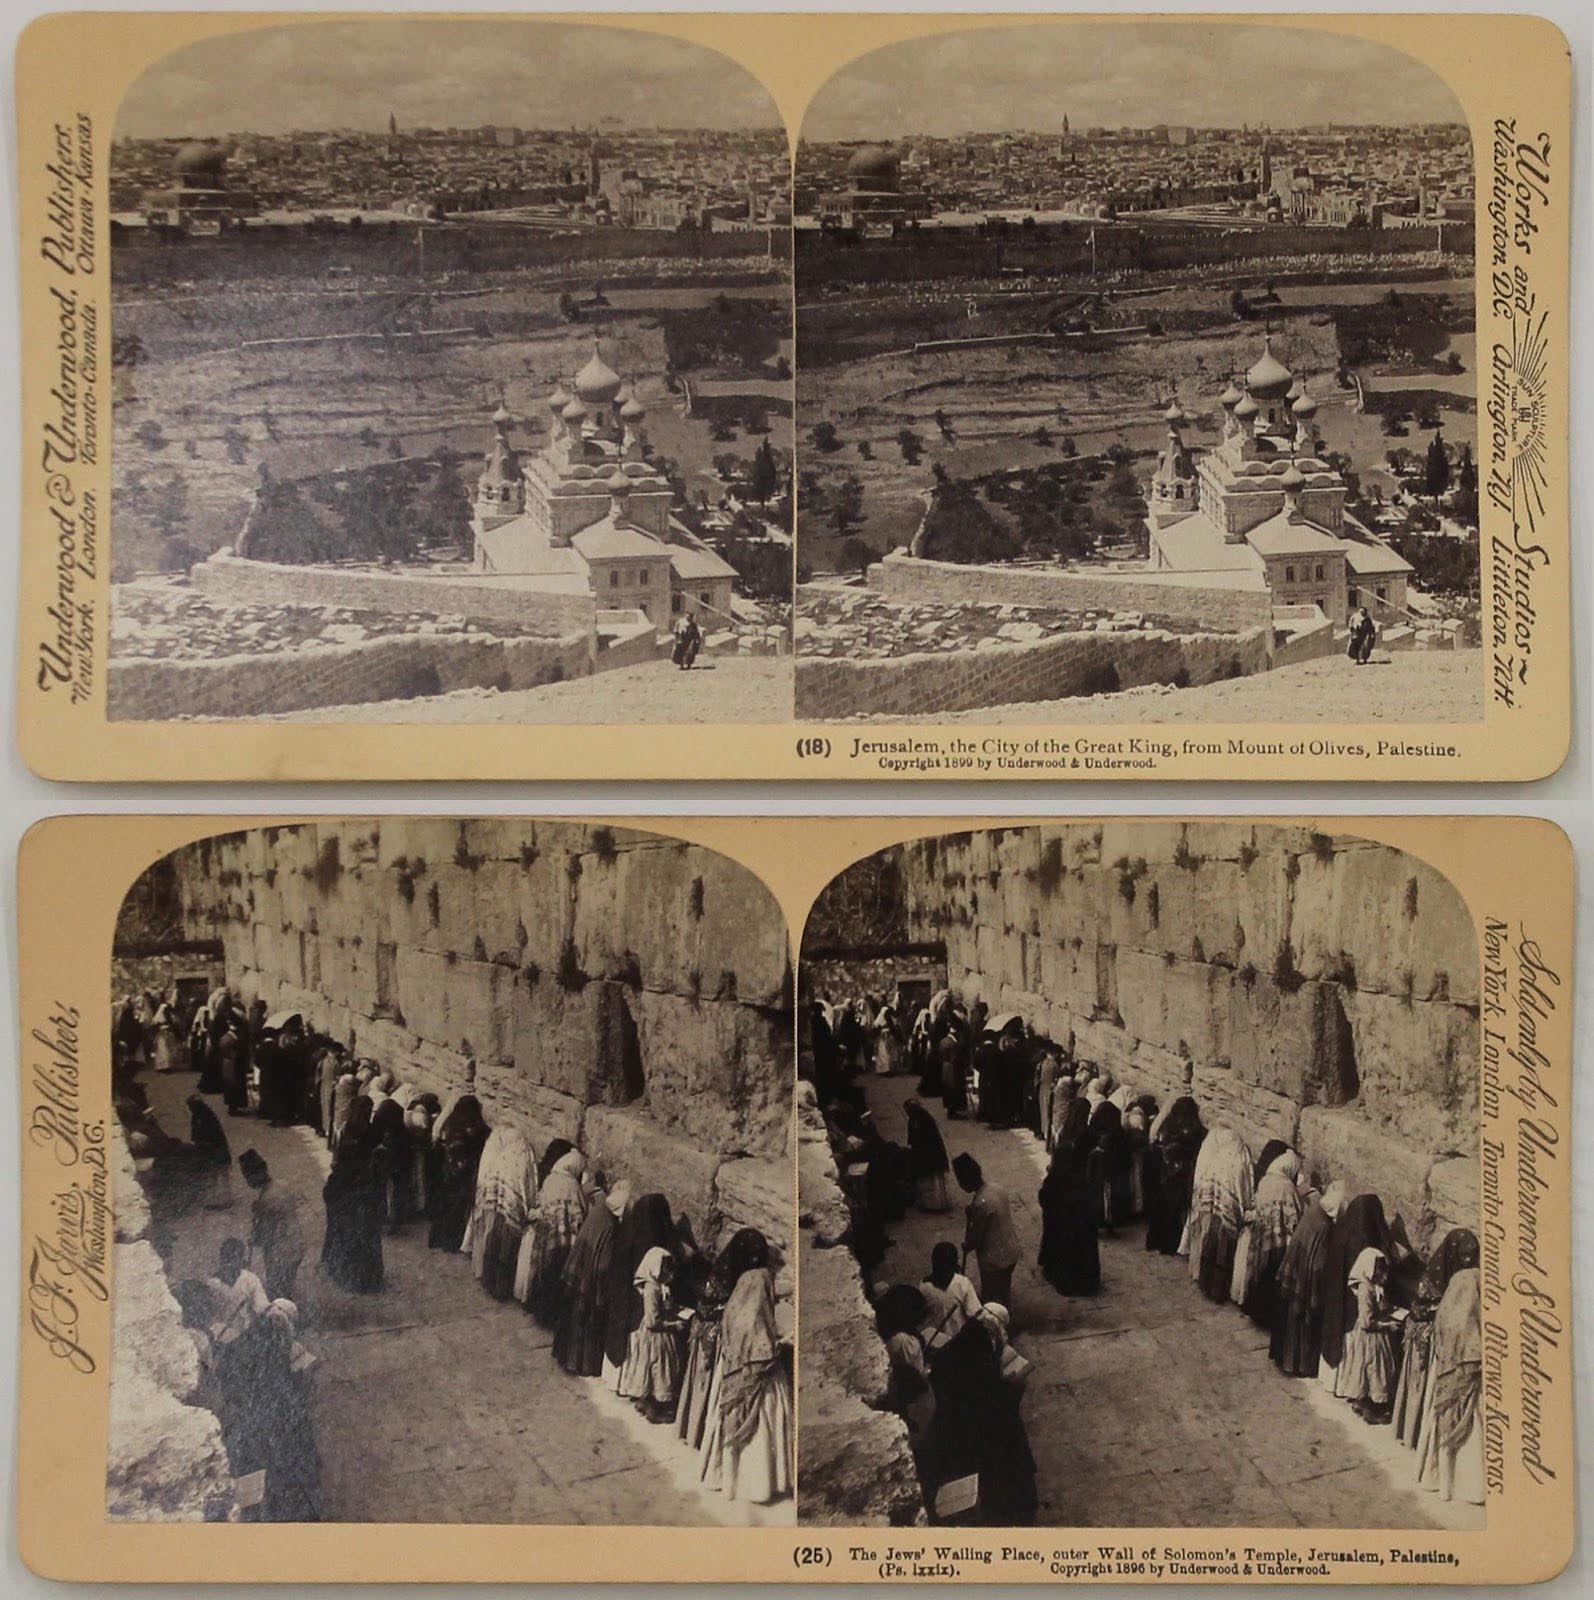 Stereoscope images of Jerusalem from Mount of Olives and The Wailing Place at the outer Wall of Solomon's Temple, in Jerusalem.